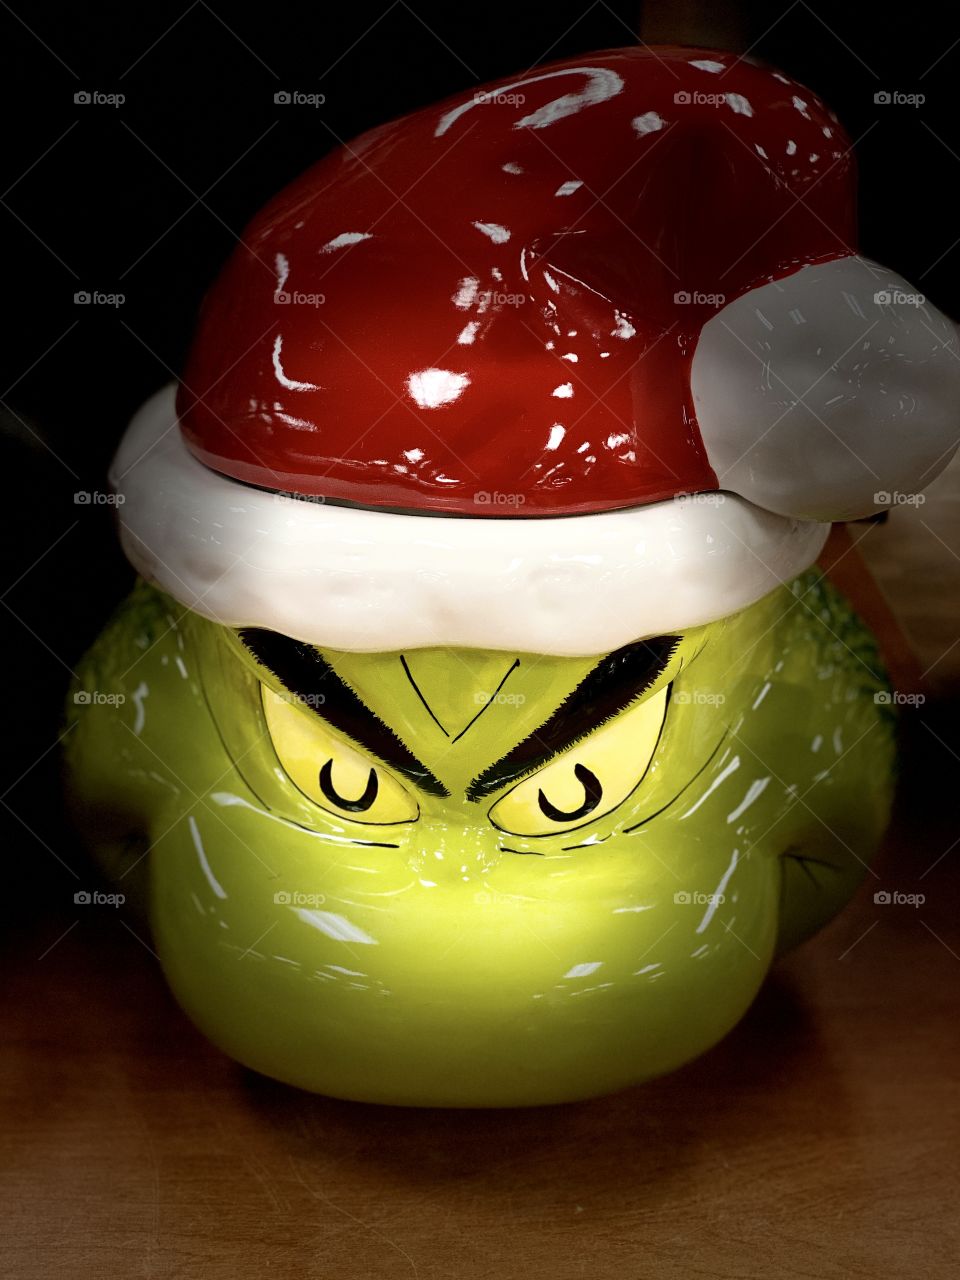 “The Grinch” This is just the head of a grinch of porcelain with a Christmas hat. The 2020 woke up the grinch inside of me. 